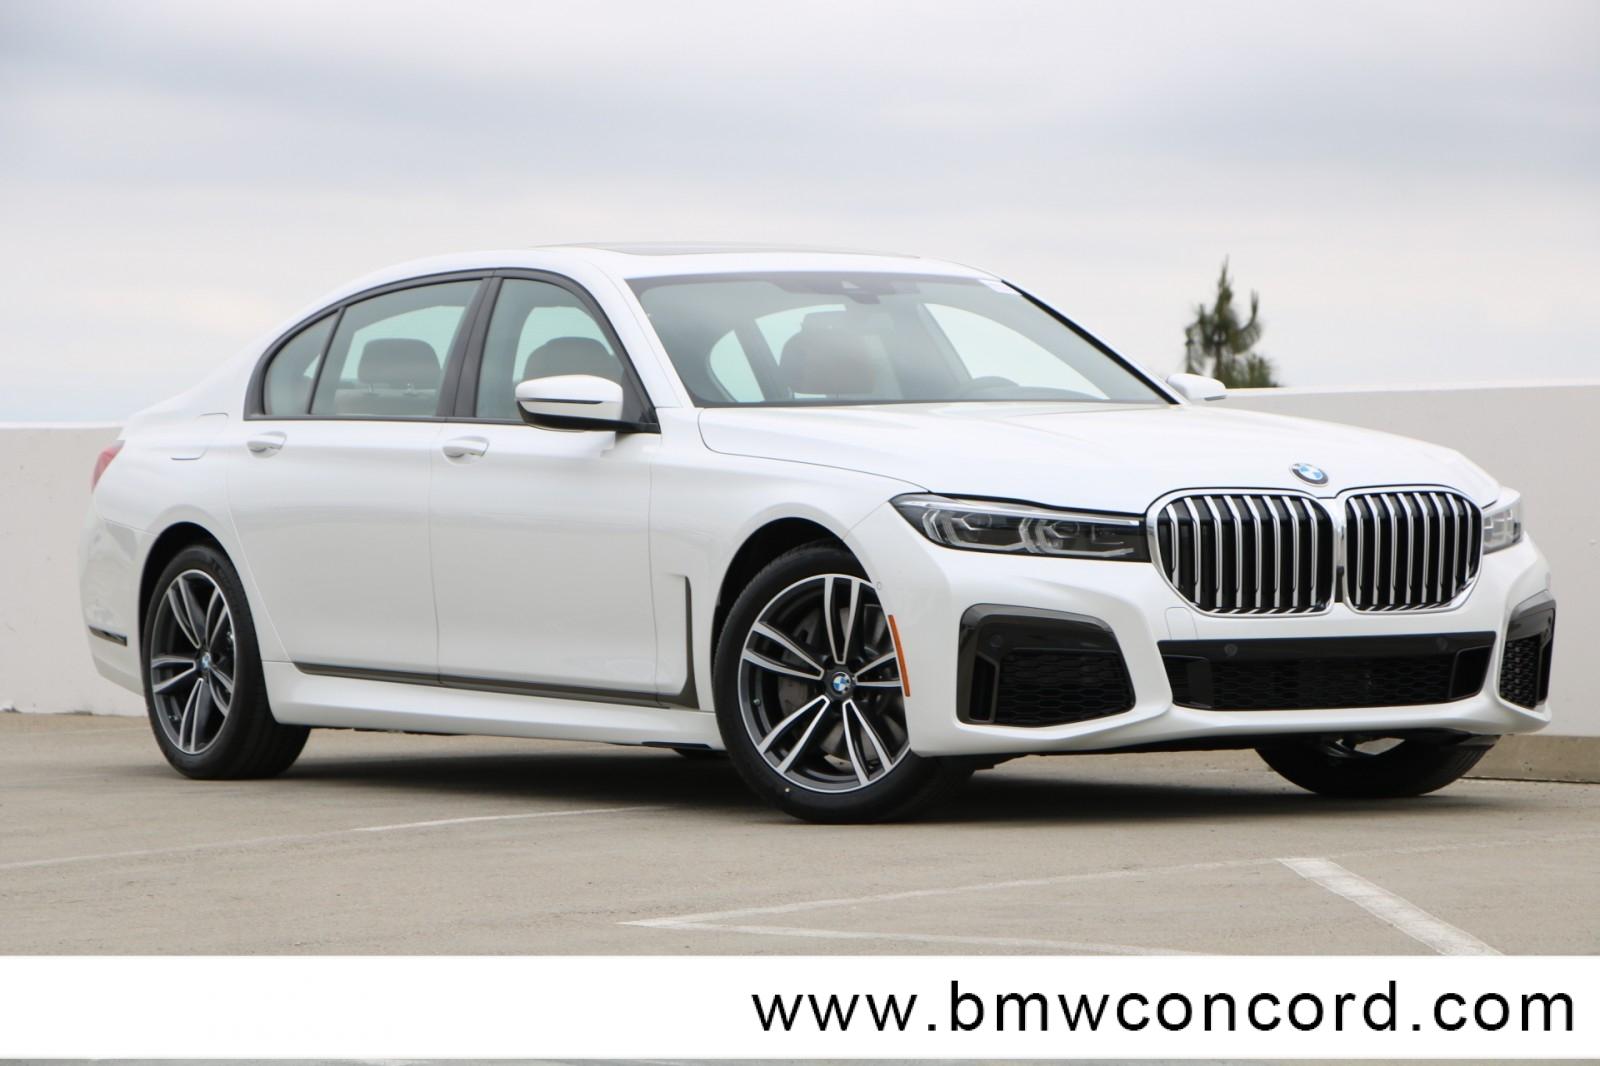 New 2020 Bmw 7 Series 745e Xdrive Iperformance Plug In Hy 4dr Car In